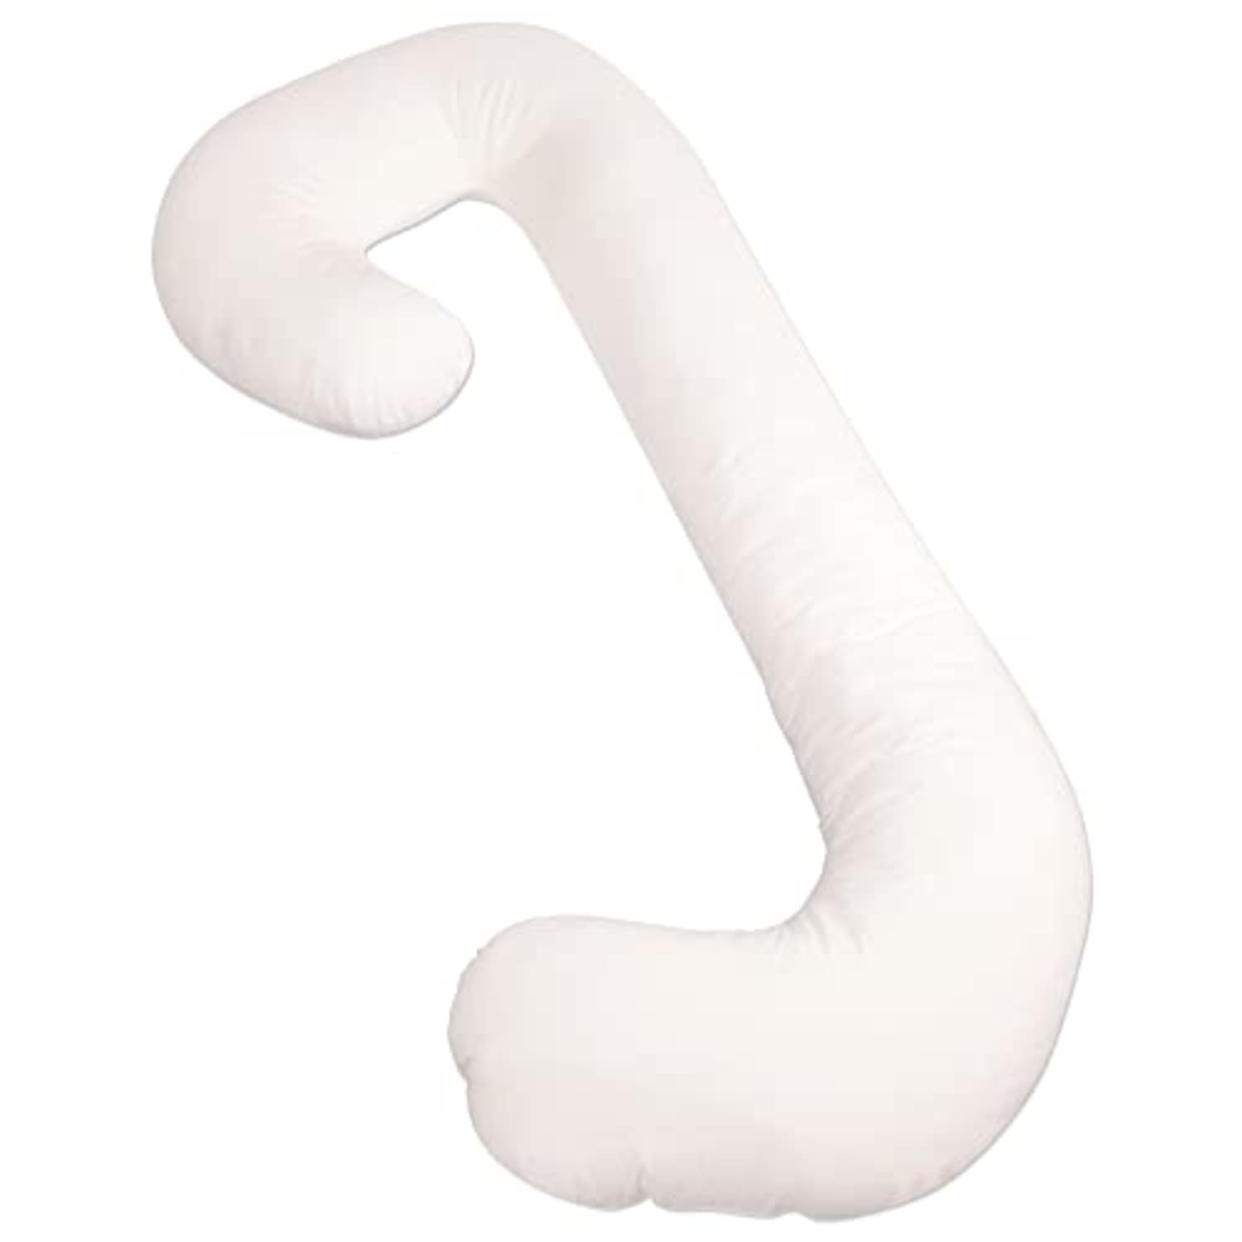 Leachco Snoogle® Supreme │ Total Body Pregnancy/Maternity Pillow │ with a Zippered Removable Cover - Ivory (AMAZON)